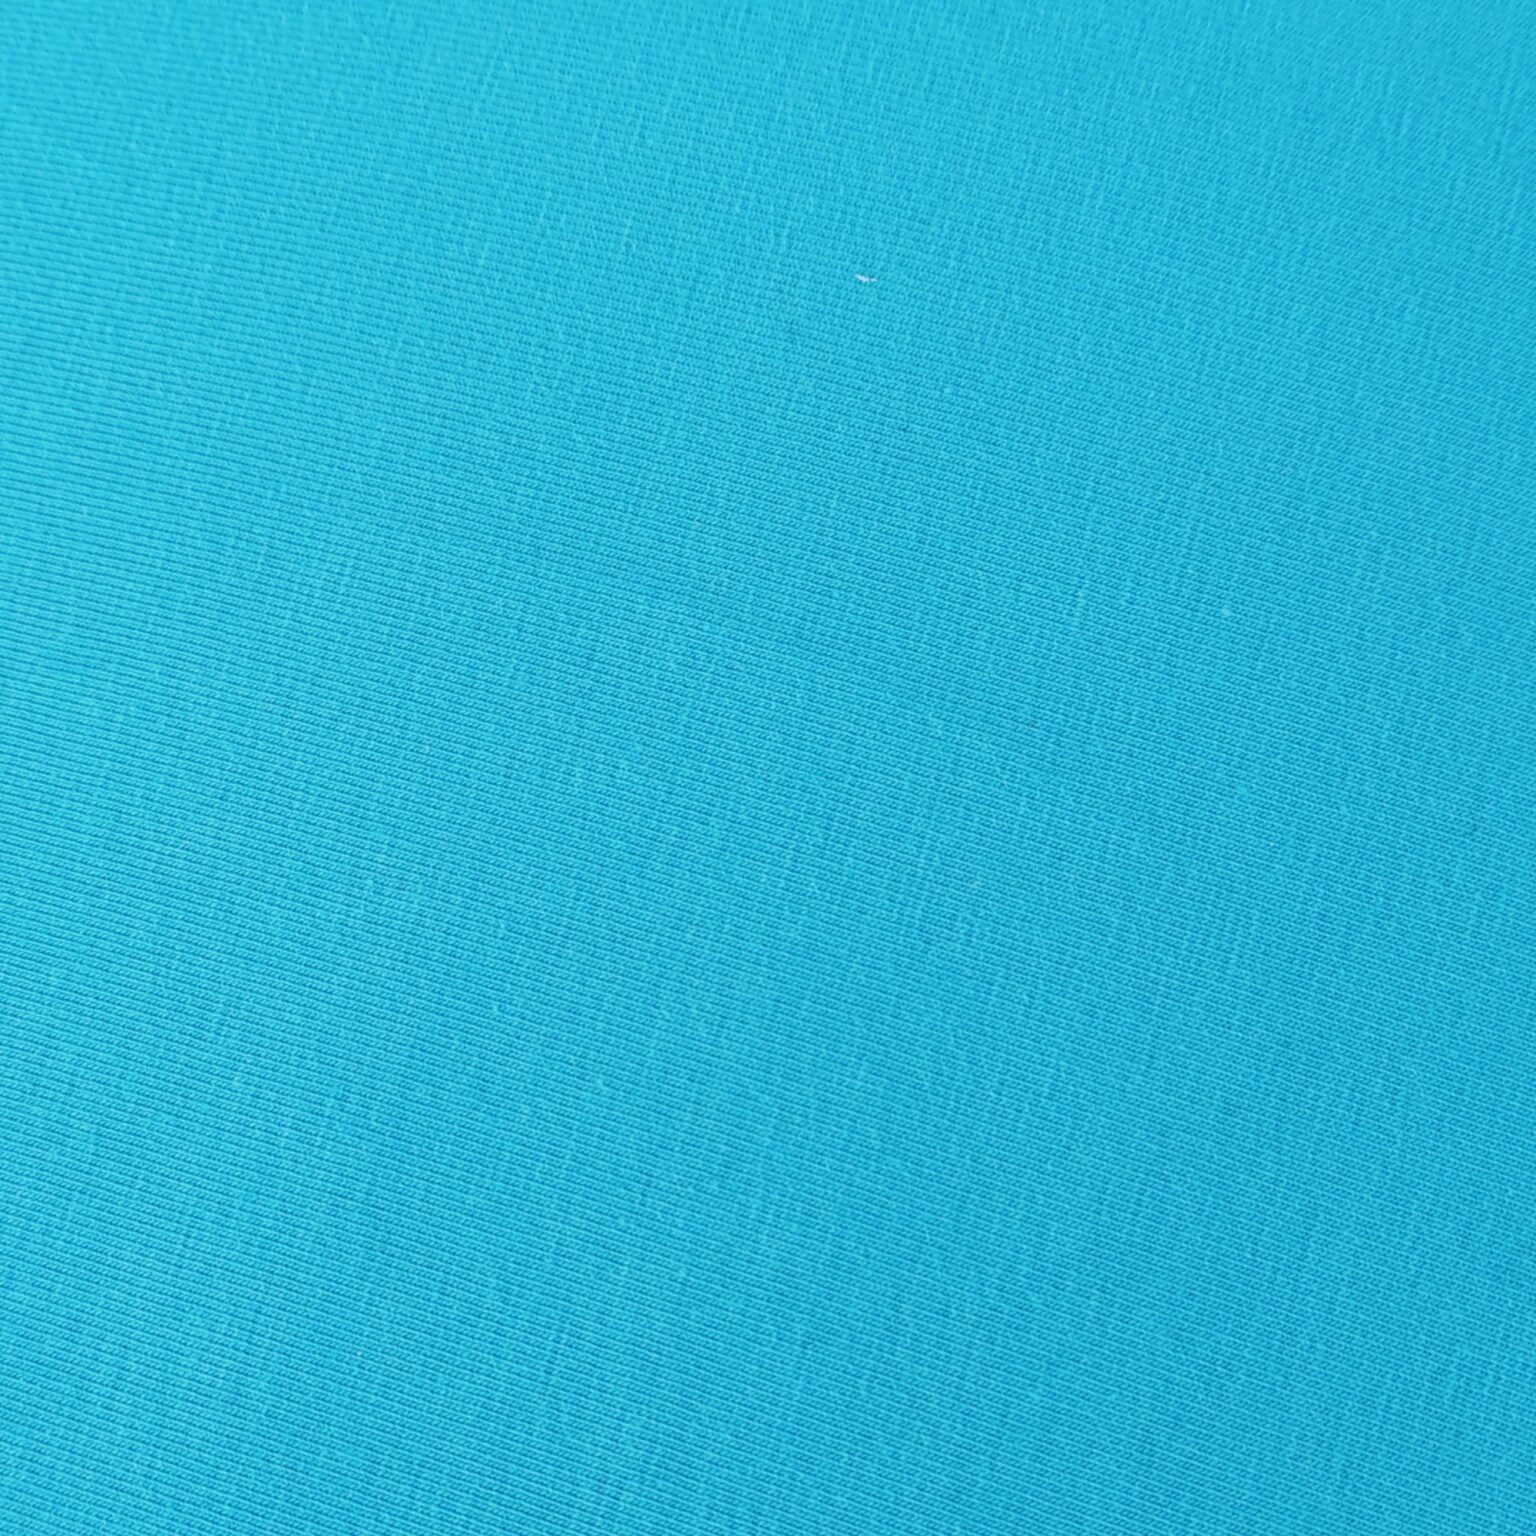 Cotton Jersey Fabric - Plain Turquoise | More Sewing